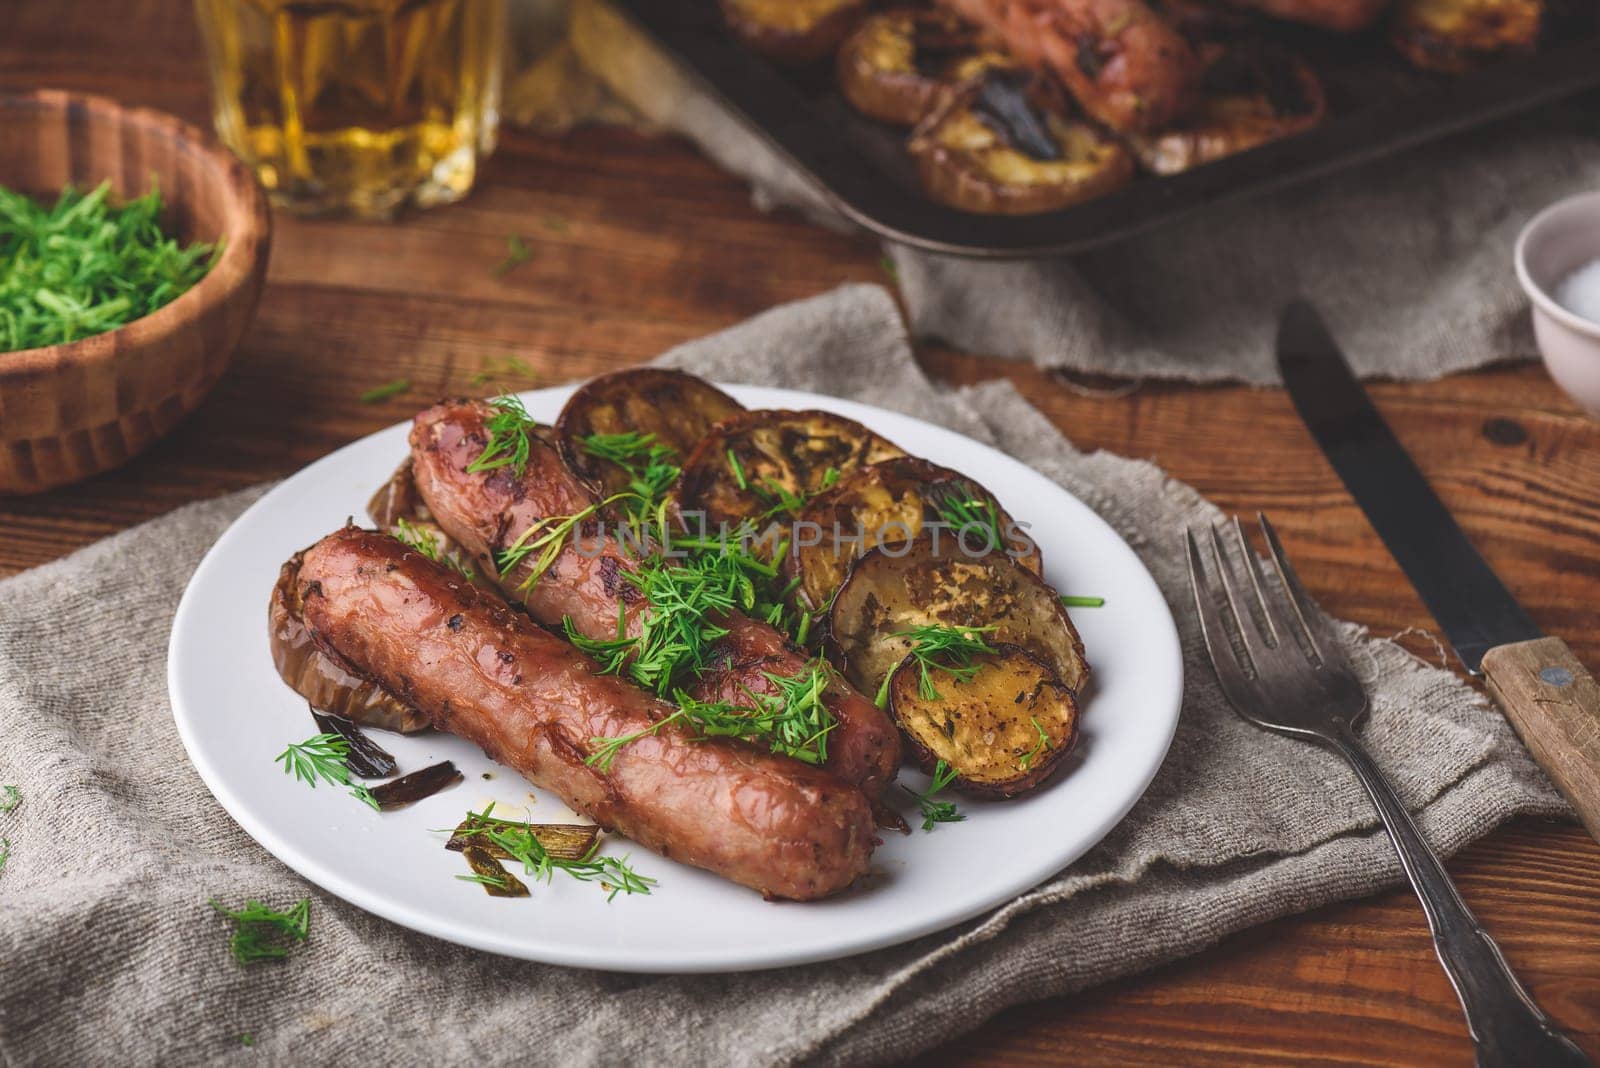 Baked Pork Sausages with Eggplant and Leek on White Plate Garnished with Fresh Herbs